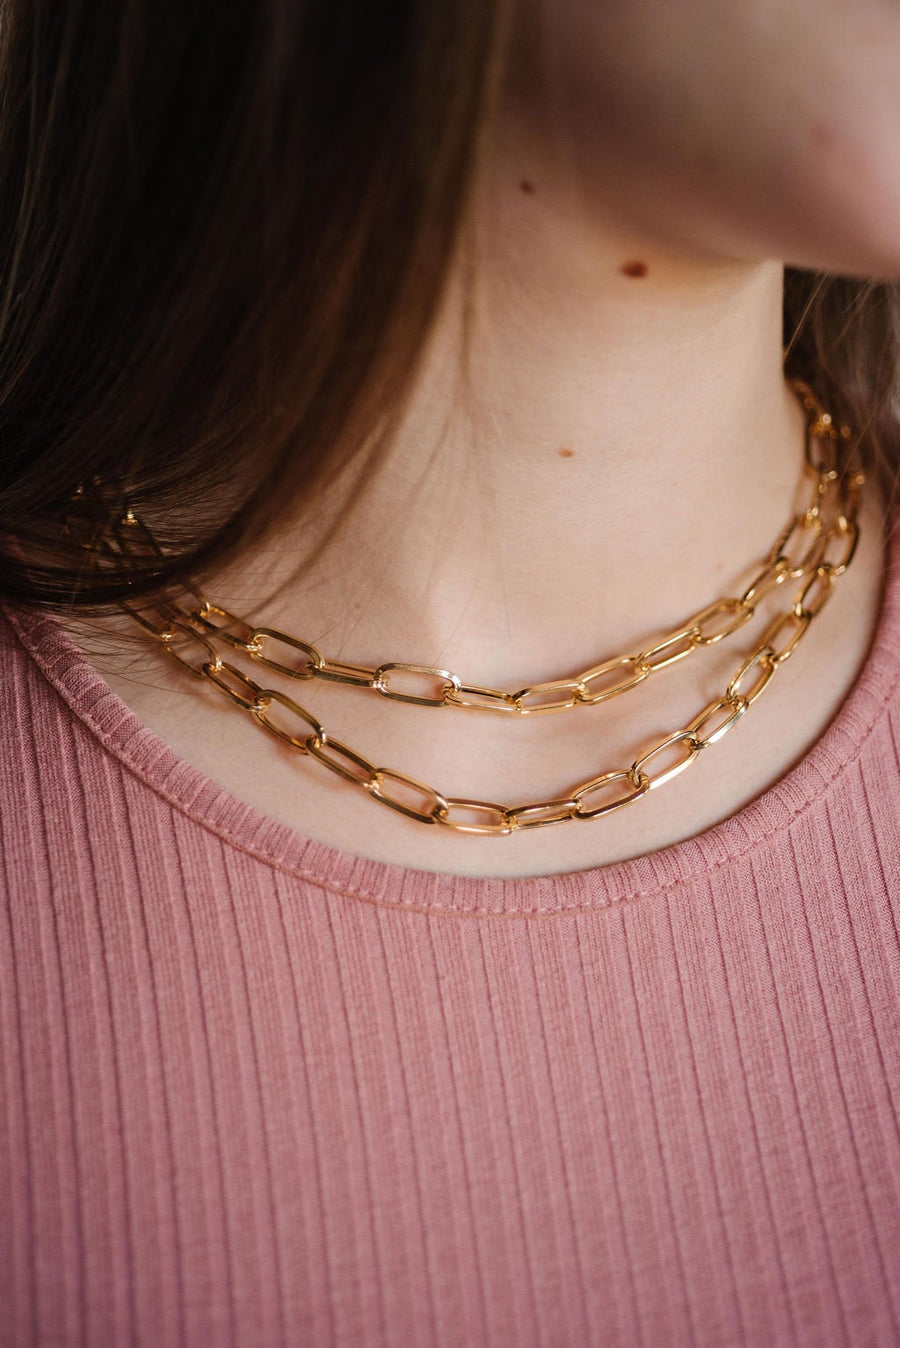 Large Link Chain, 18k Gold Filled Chain, Paperclip Chain, Gold Chain, Gold Jewelry, Necklace, Choker, Layering Jewelry, Christmas Gift, XXL